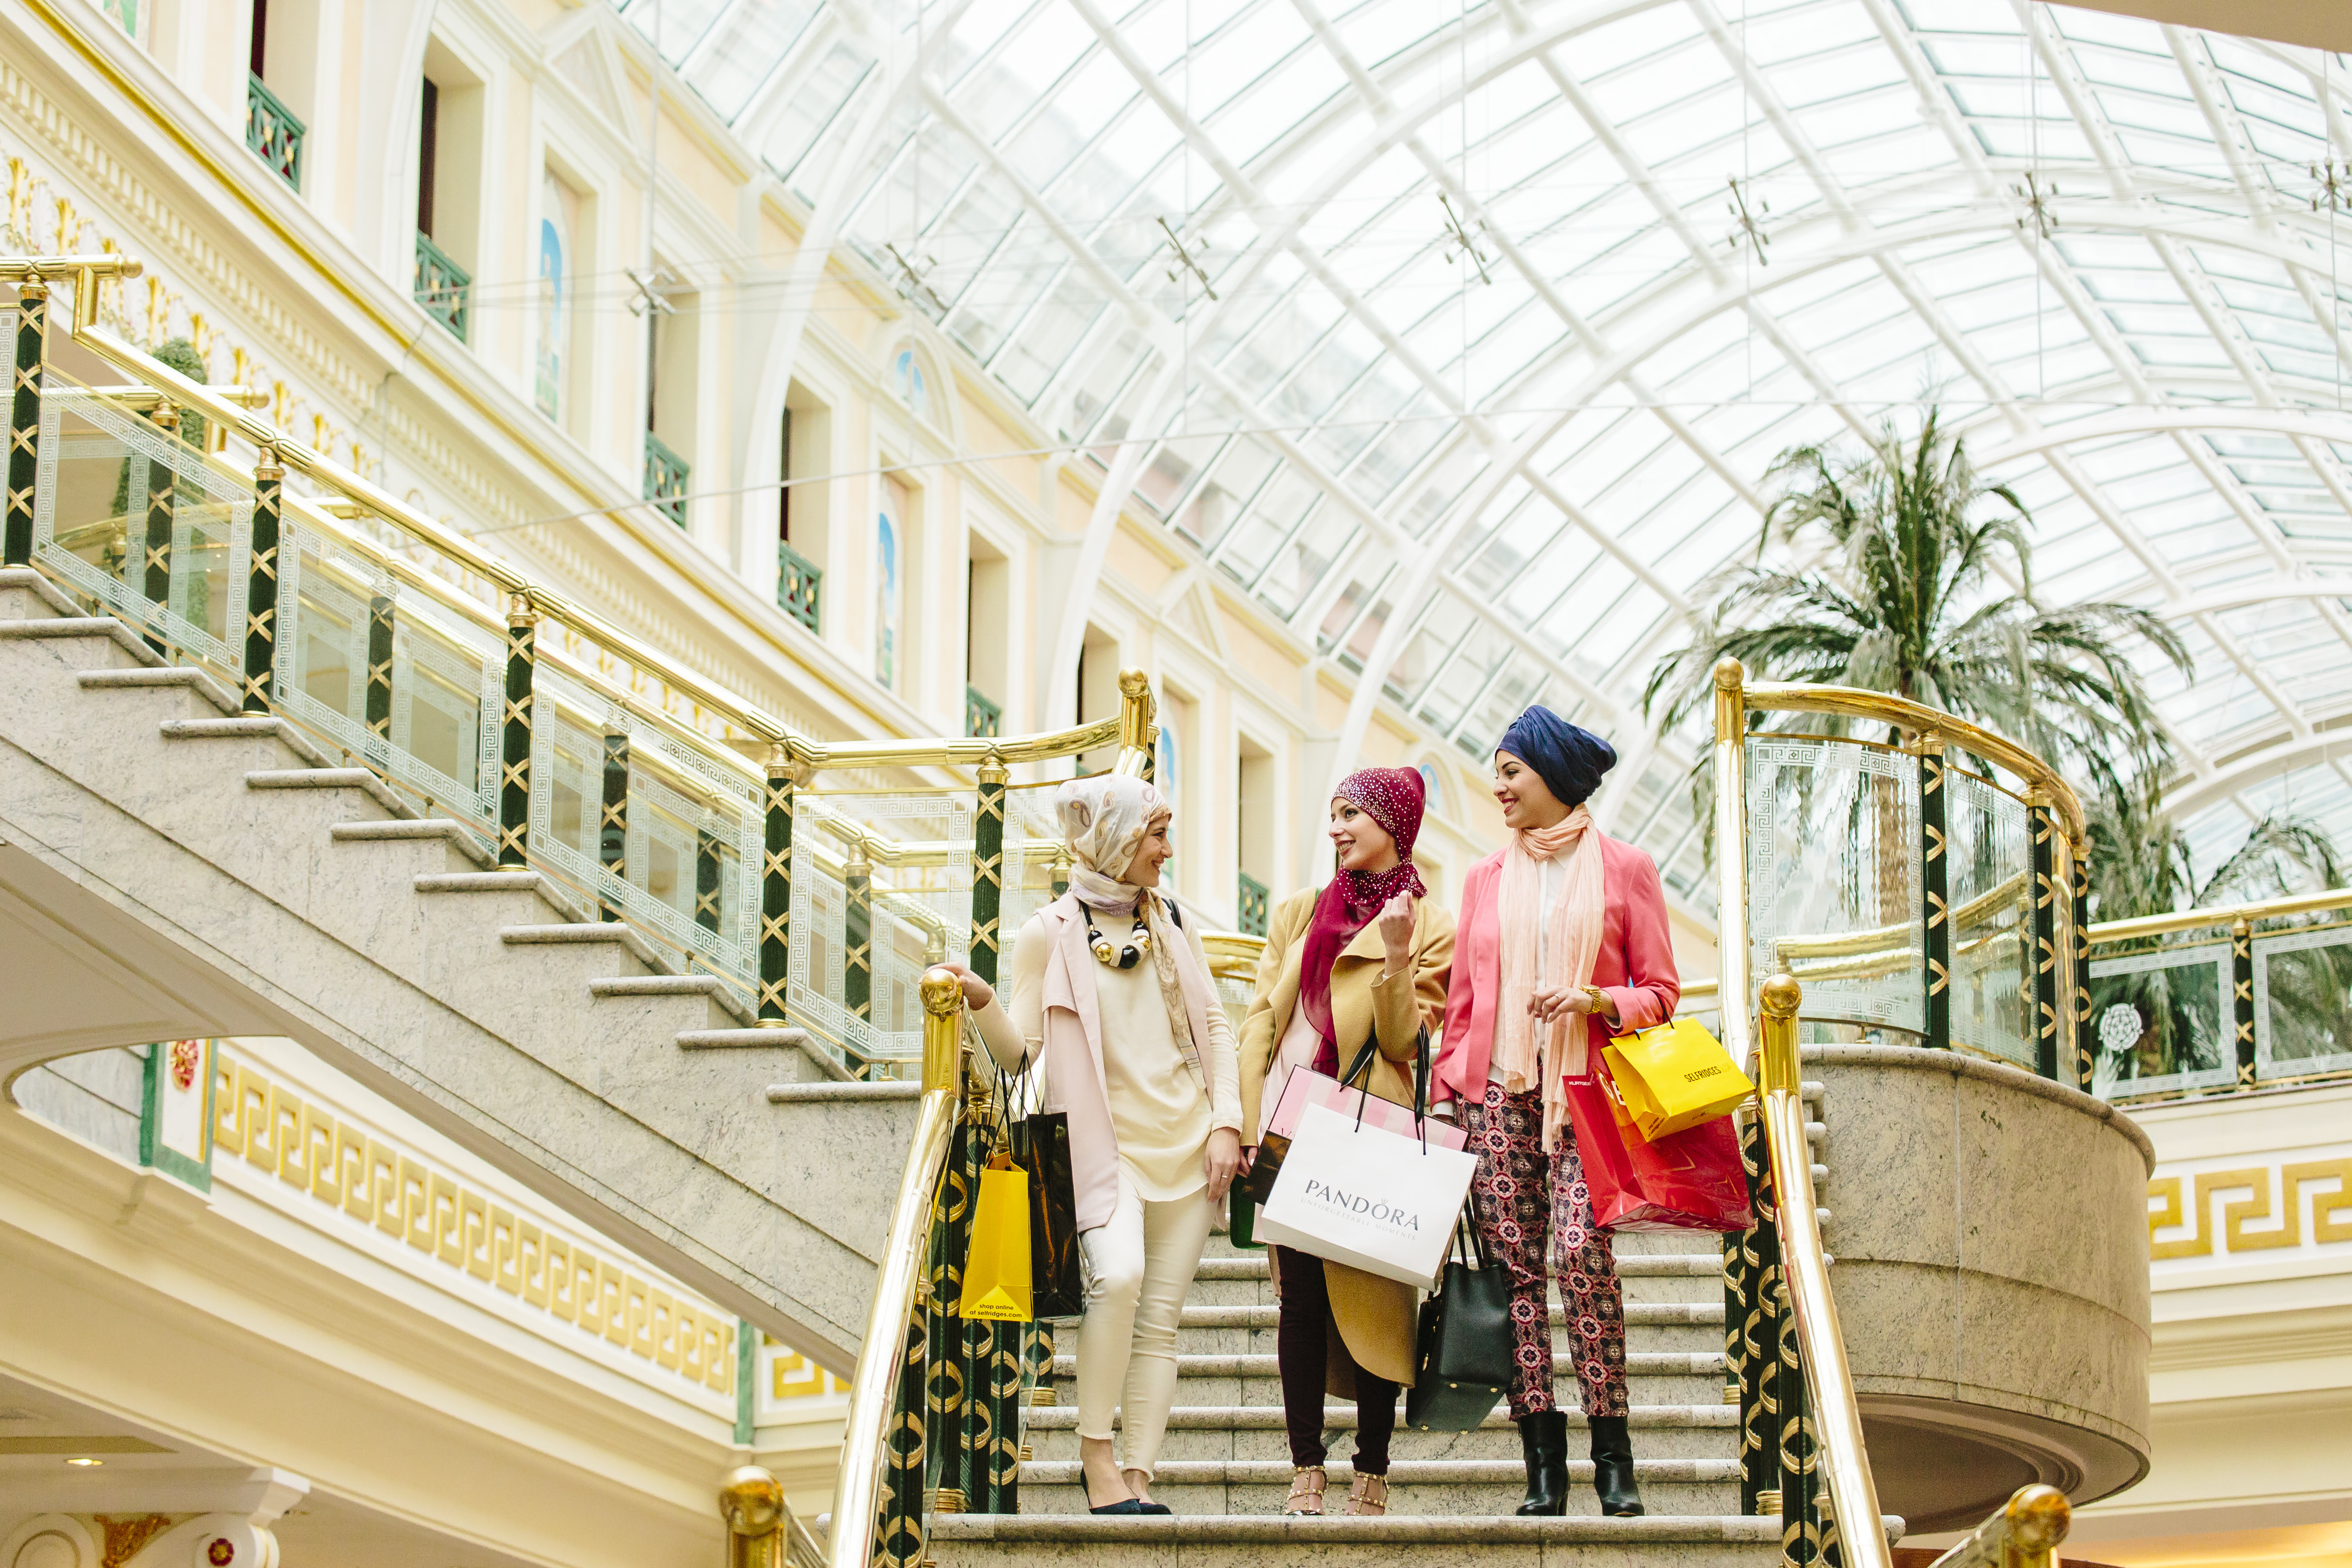 Three women, wearing scarves, walking with shopping bags